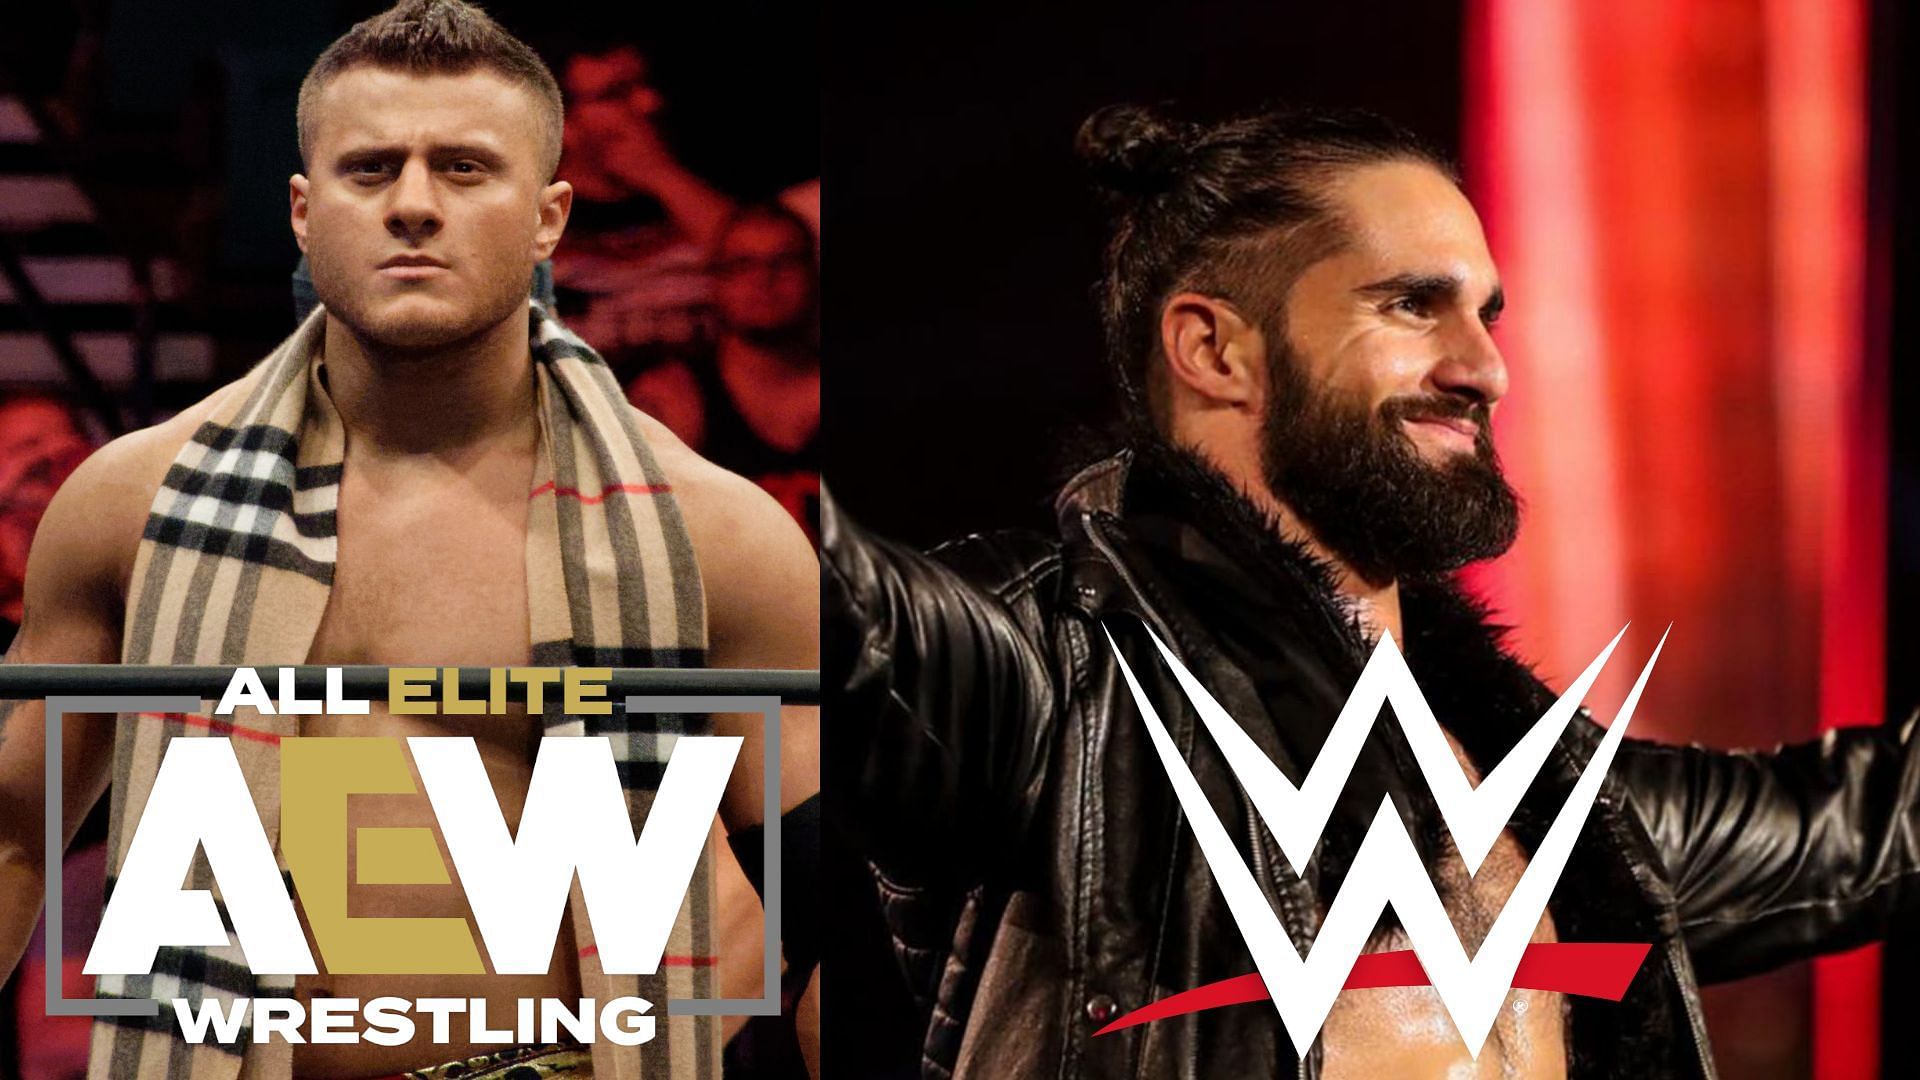 MJF and Seth Rollins are two wrestlers who have made headlines on numerous occassions revolving around the smacktalk between WWE &amp; AEW.